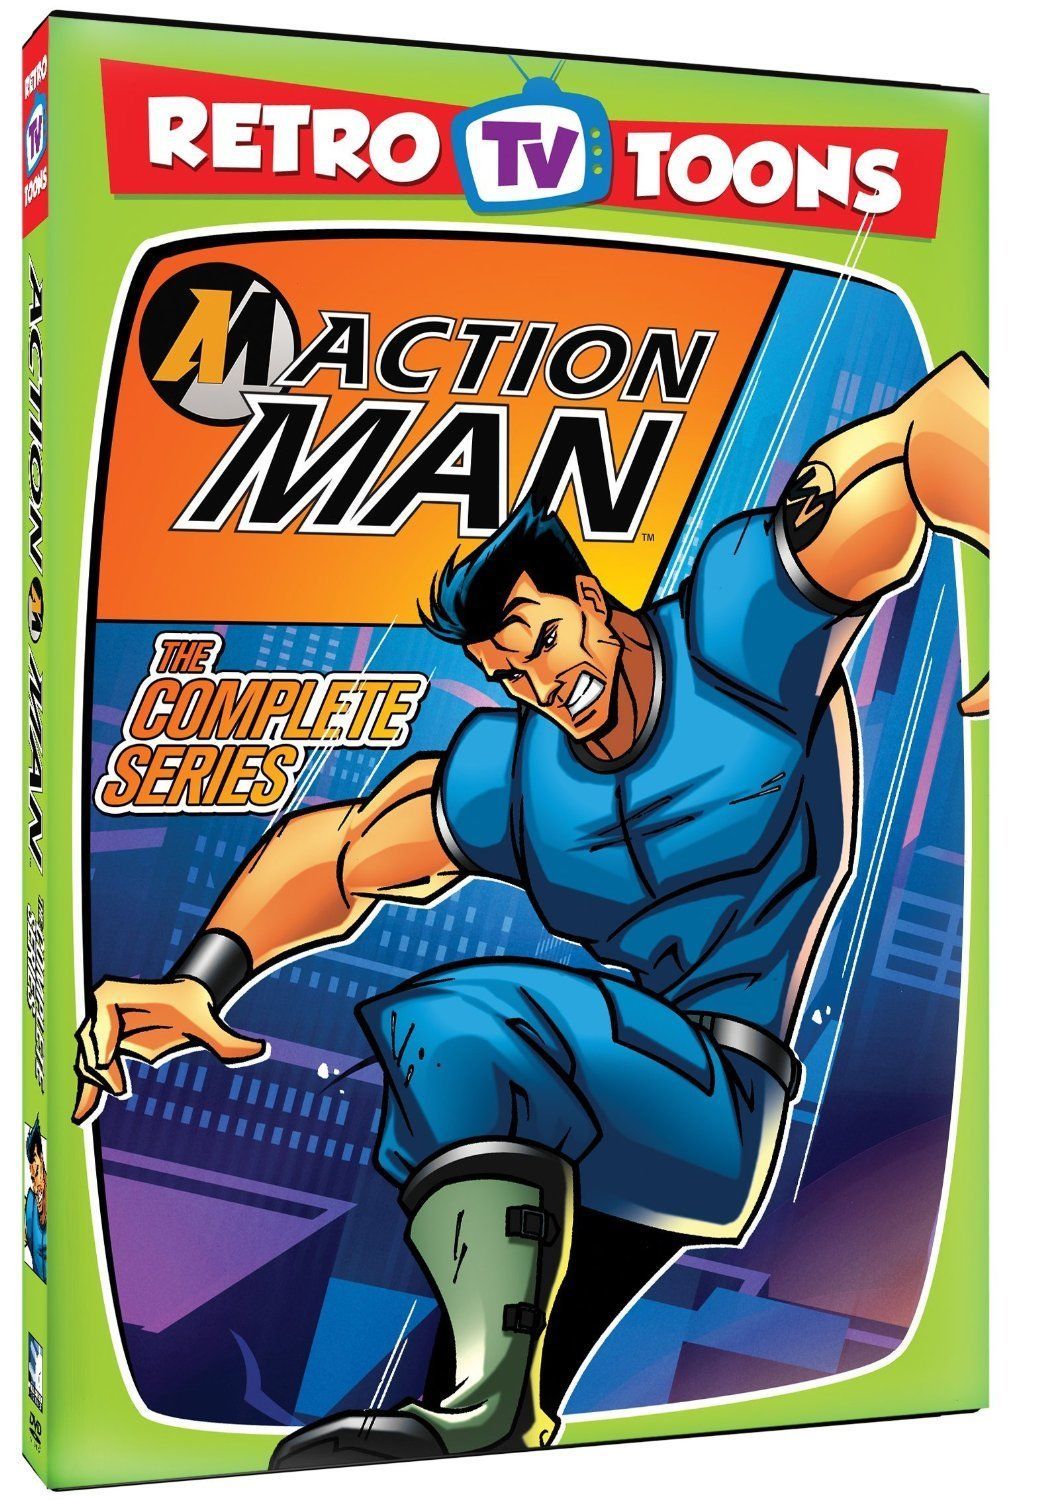 Retro TV Toons Action Man Complete Series DVD Set TV Show Collection Animated R1 - $25.73